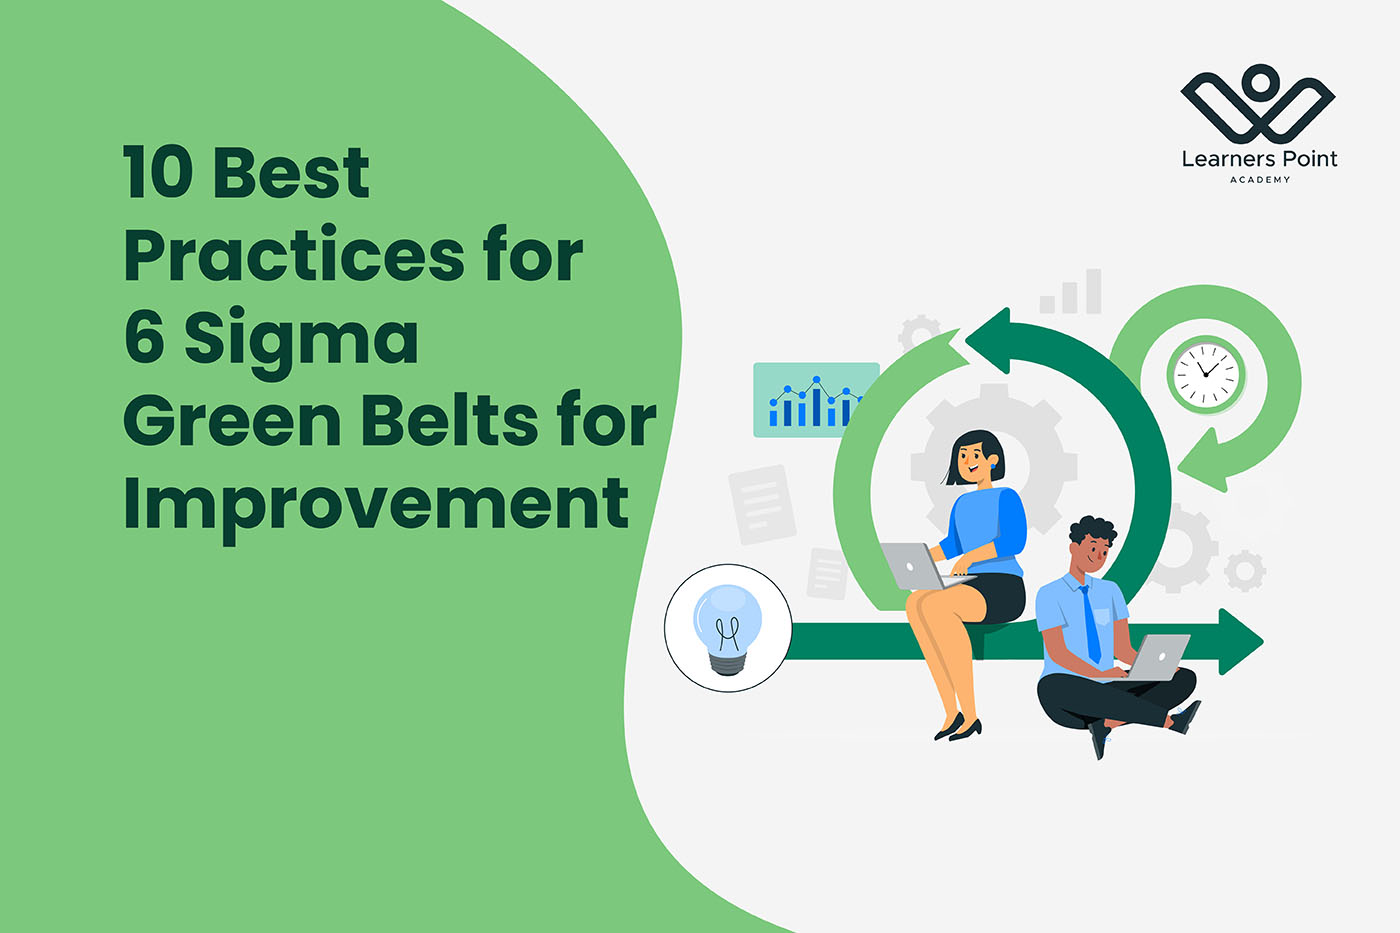 10 Best Practices for 6 Sigma Green Belts for Improvement